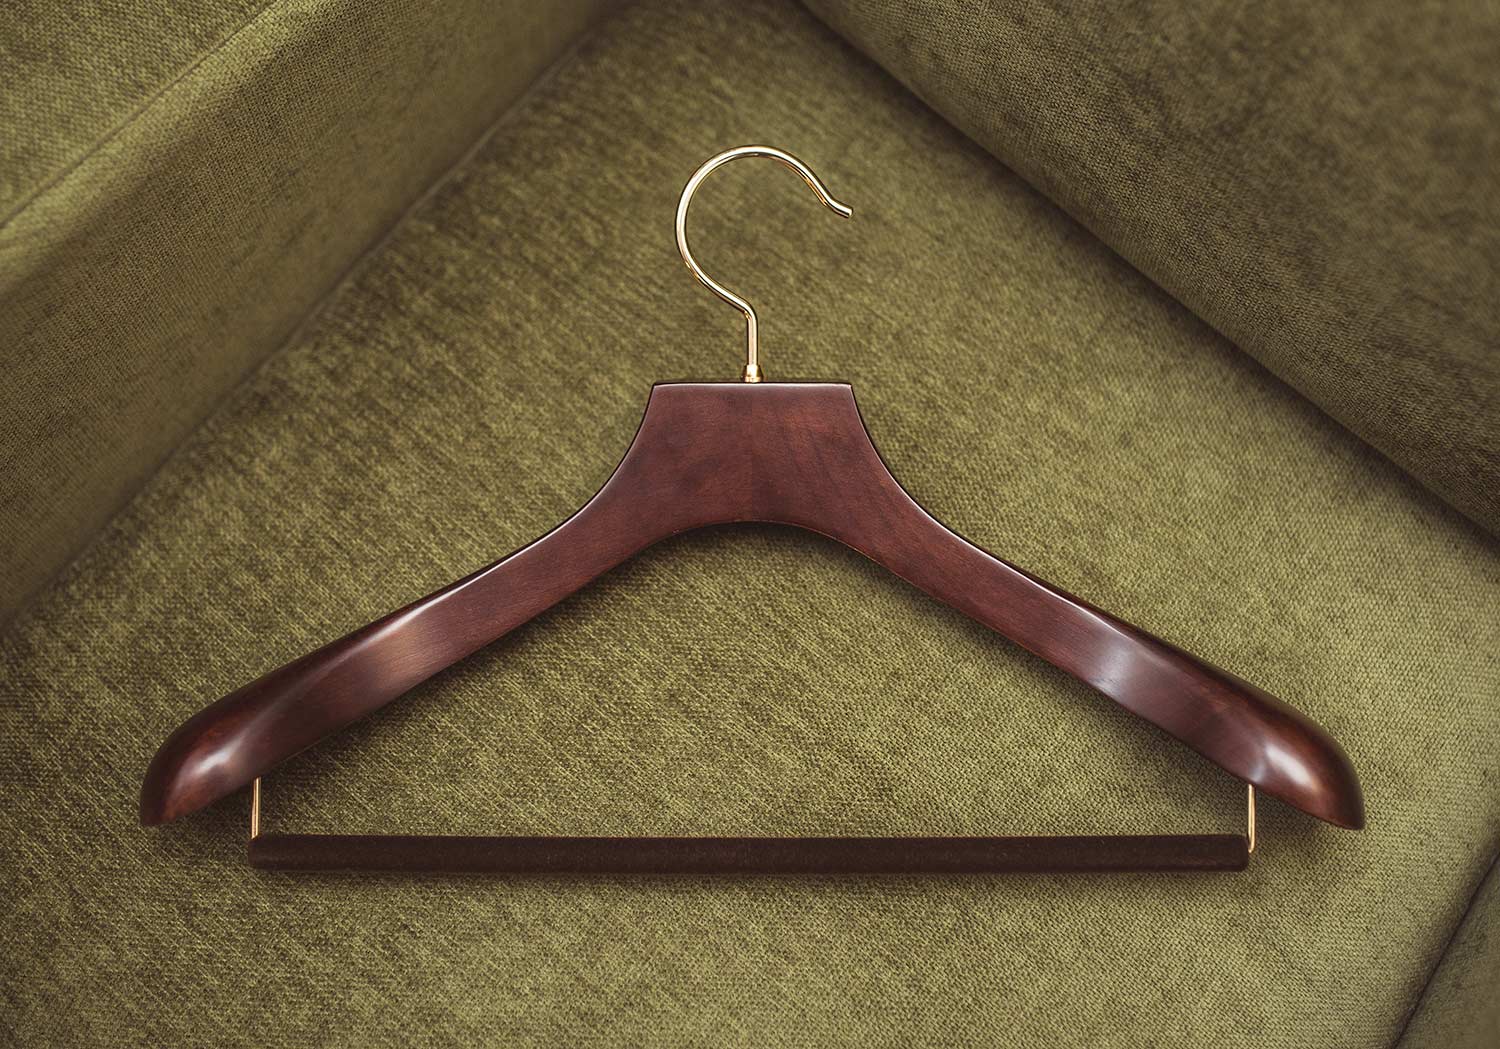 Slim Luxe Wood Hangers - All Hung Up